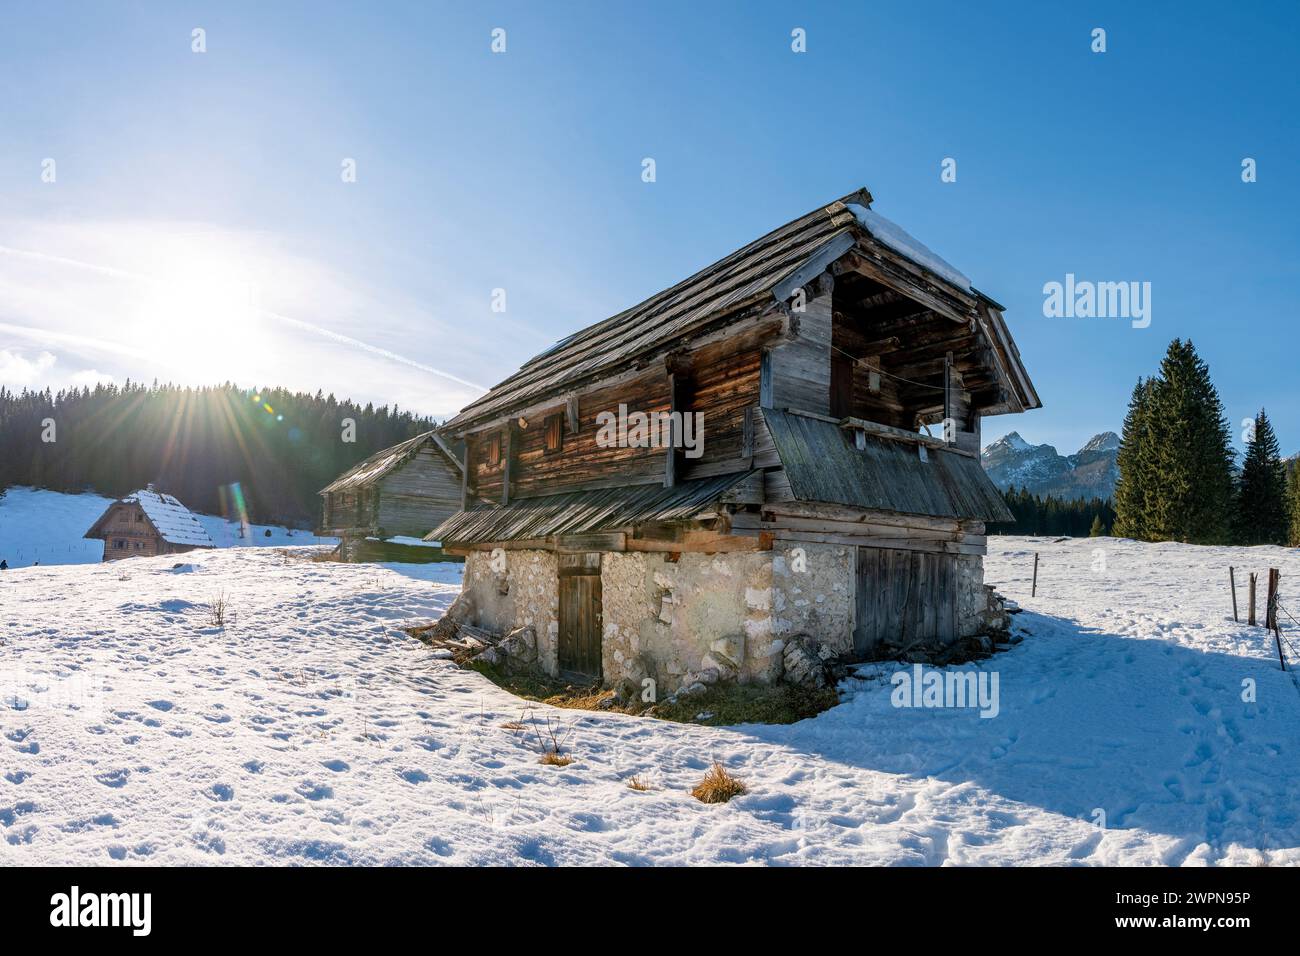 Pokljuka is an alpine plateau in north-western Slovenia. It is located in the Triglav National Park in the Julian Alps at around 1300 m above sea level. Stock Photo